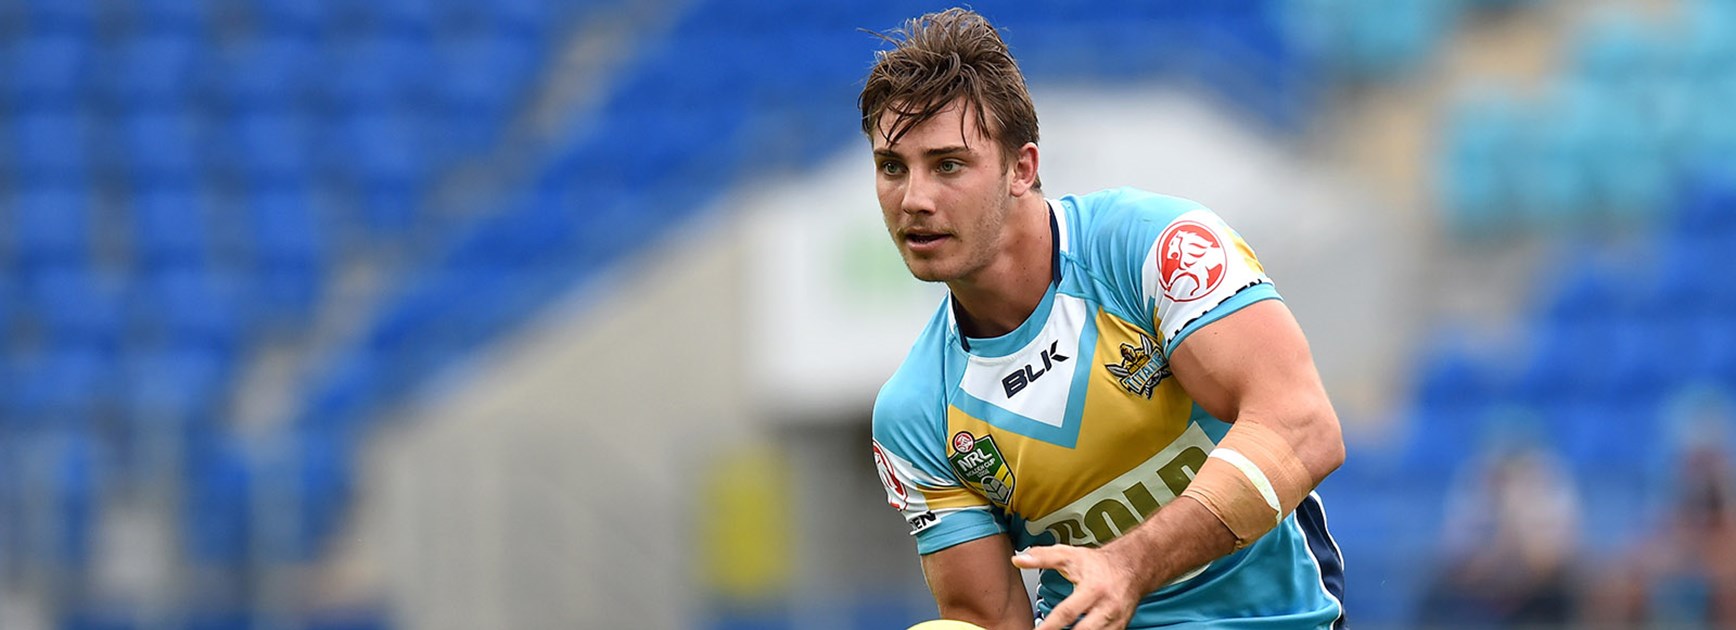 Titans hooker Karl Lawton will represent the Queensland in the under-20s State of Origin match on Wednesday night.